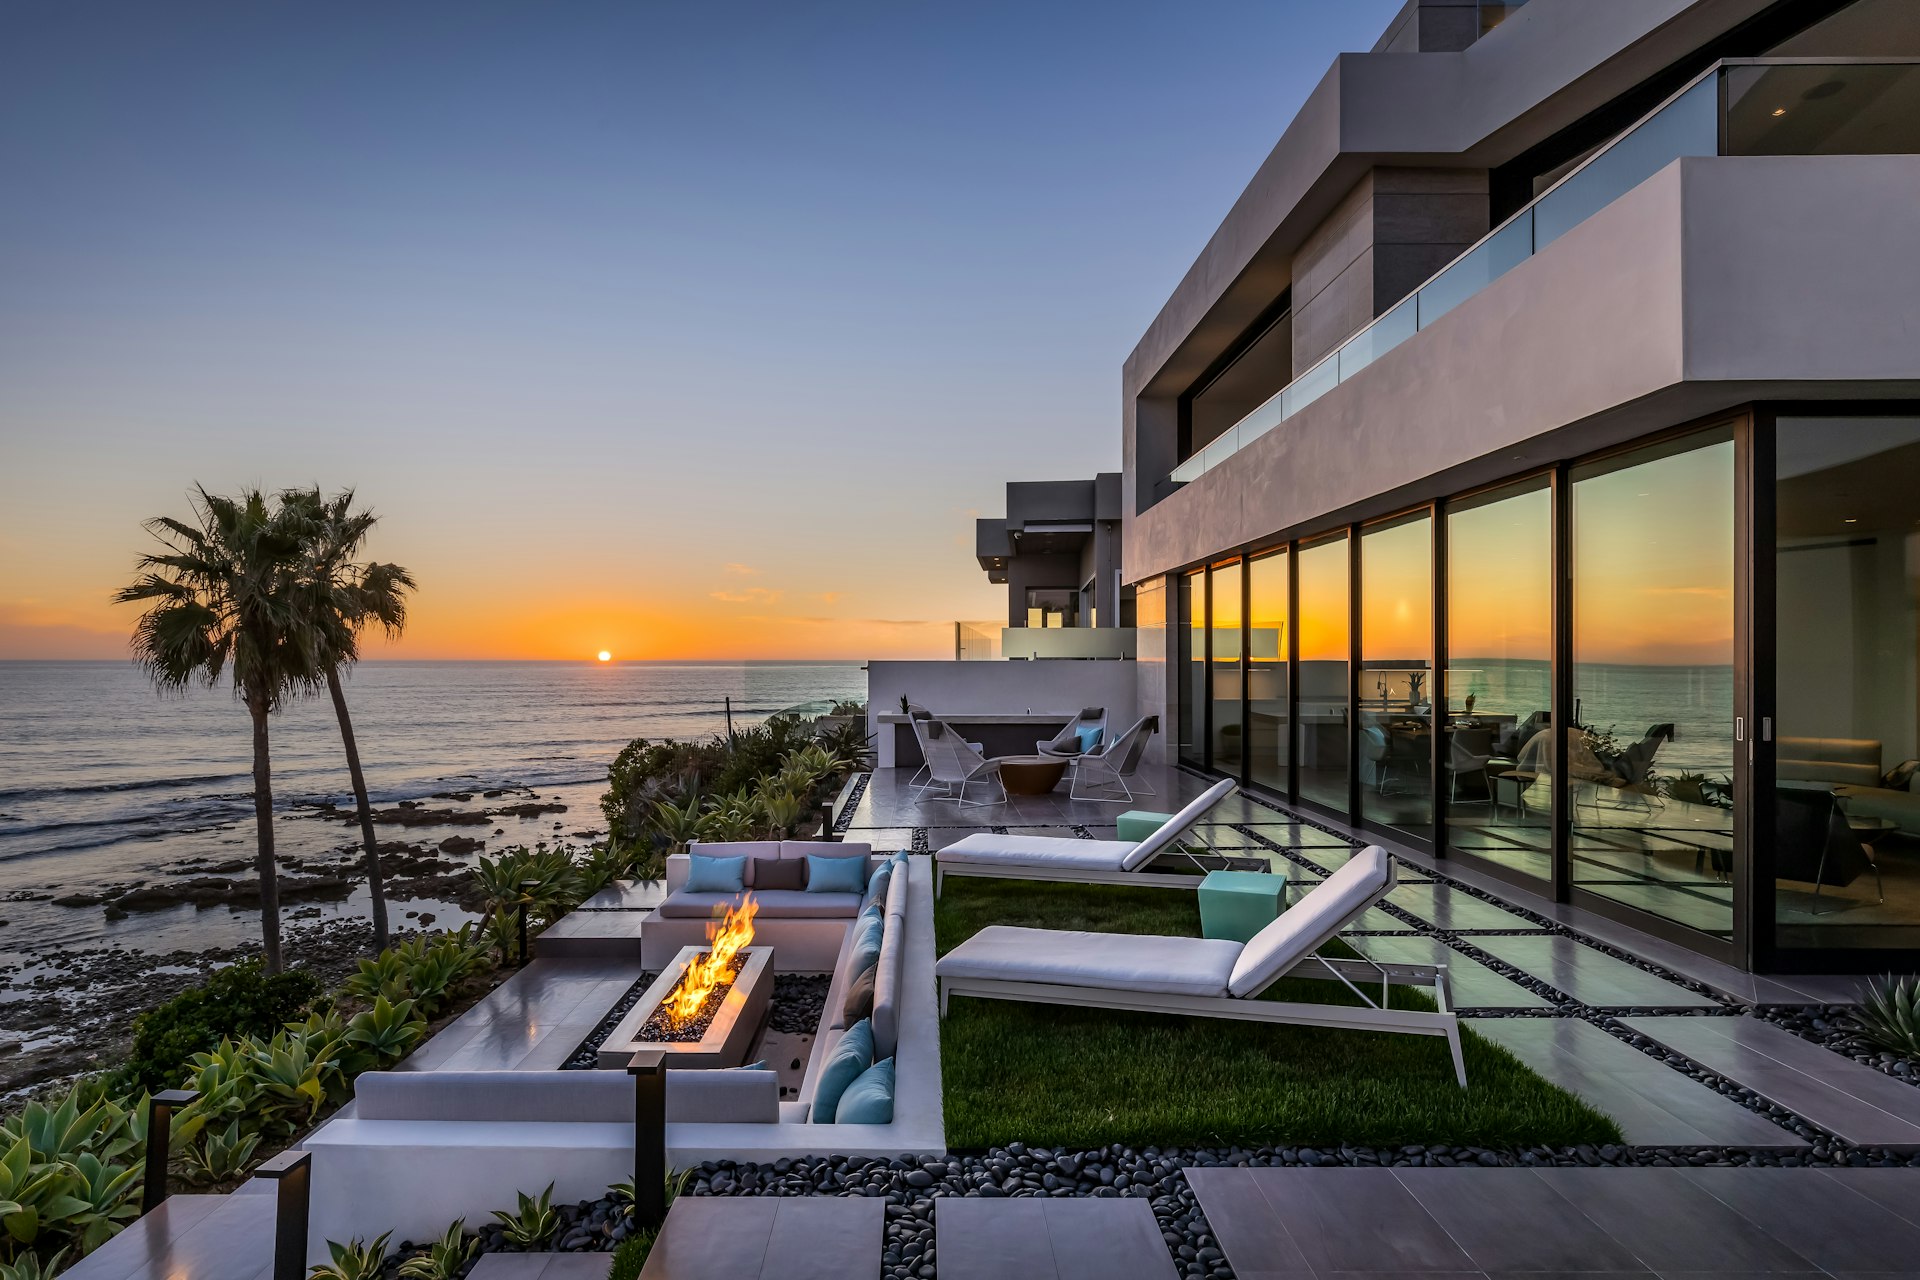 A modern home overlooking the ocean with the sunset reflected in the windows